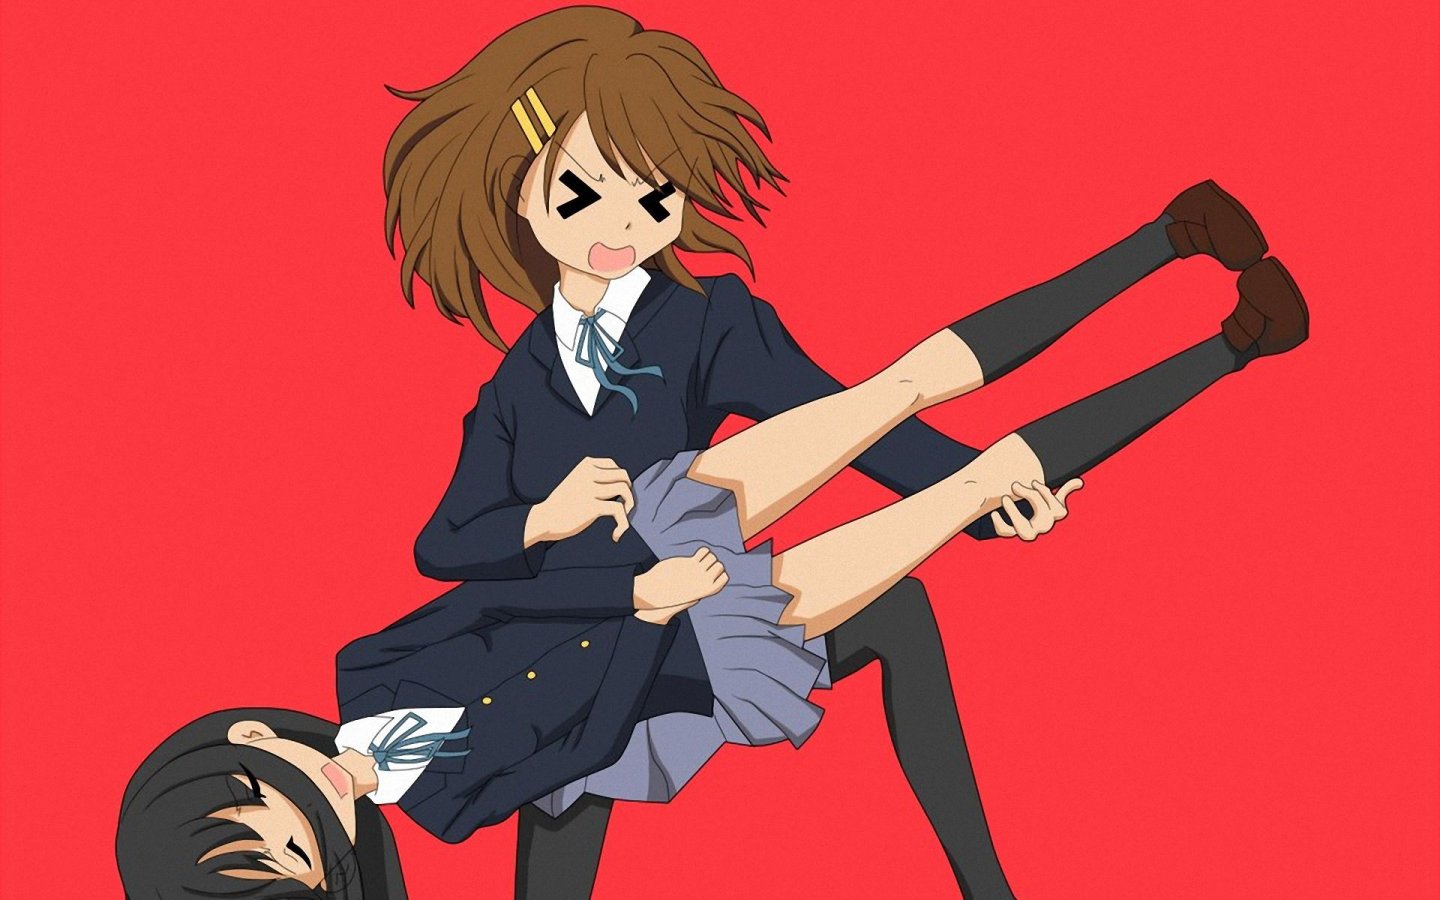 Funny K-ON! Wallpaper 1440x900 Wallpapers, 1440x900 Wallpapers ...